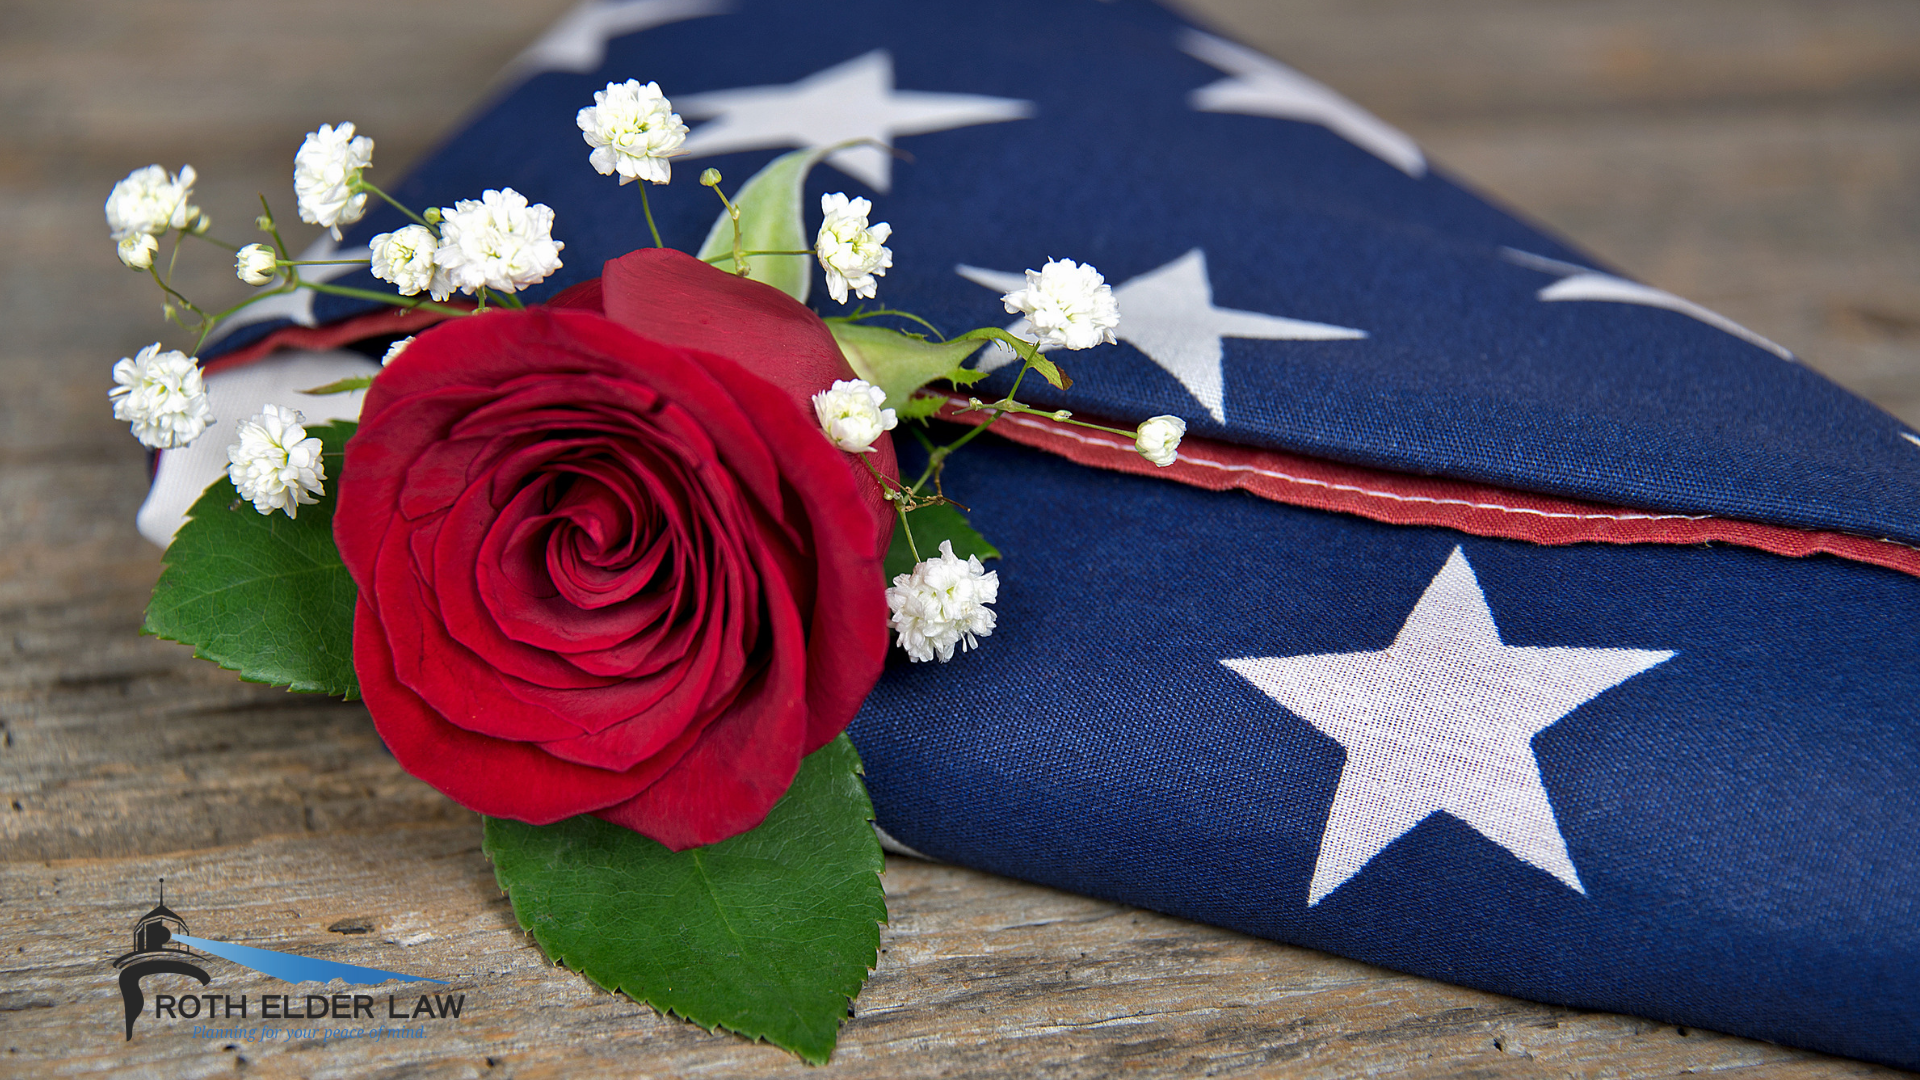 veterans-affairs-is-offering-new-funeral-benefits-for-all-deceased-veterans